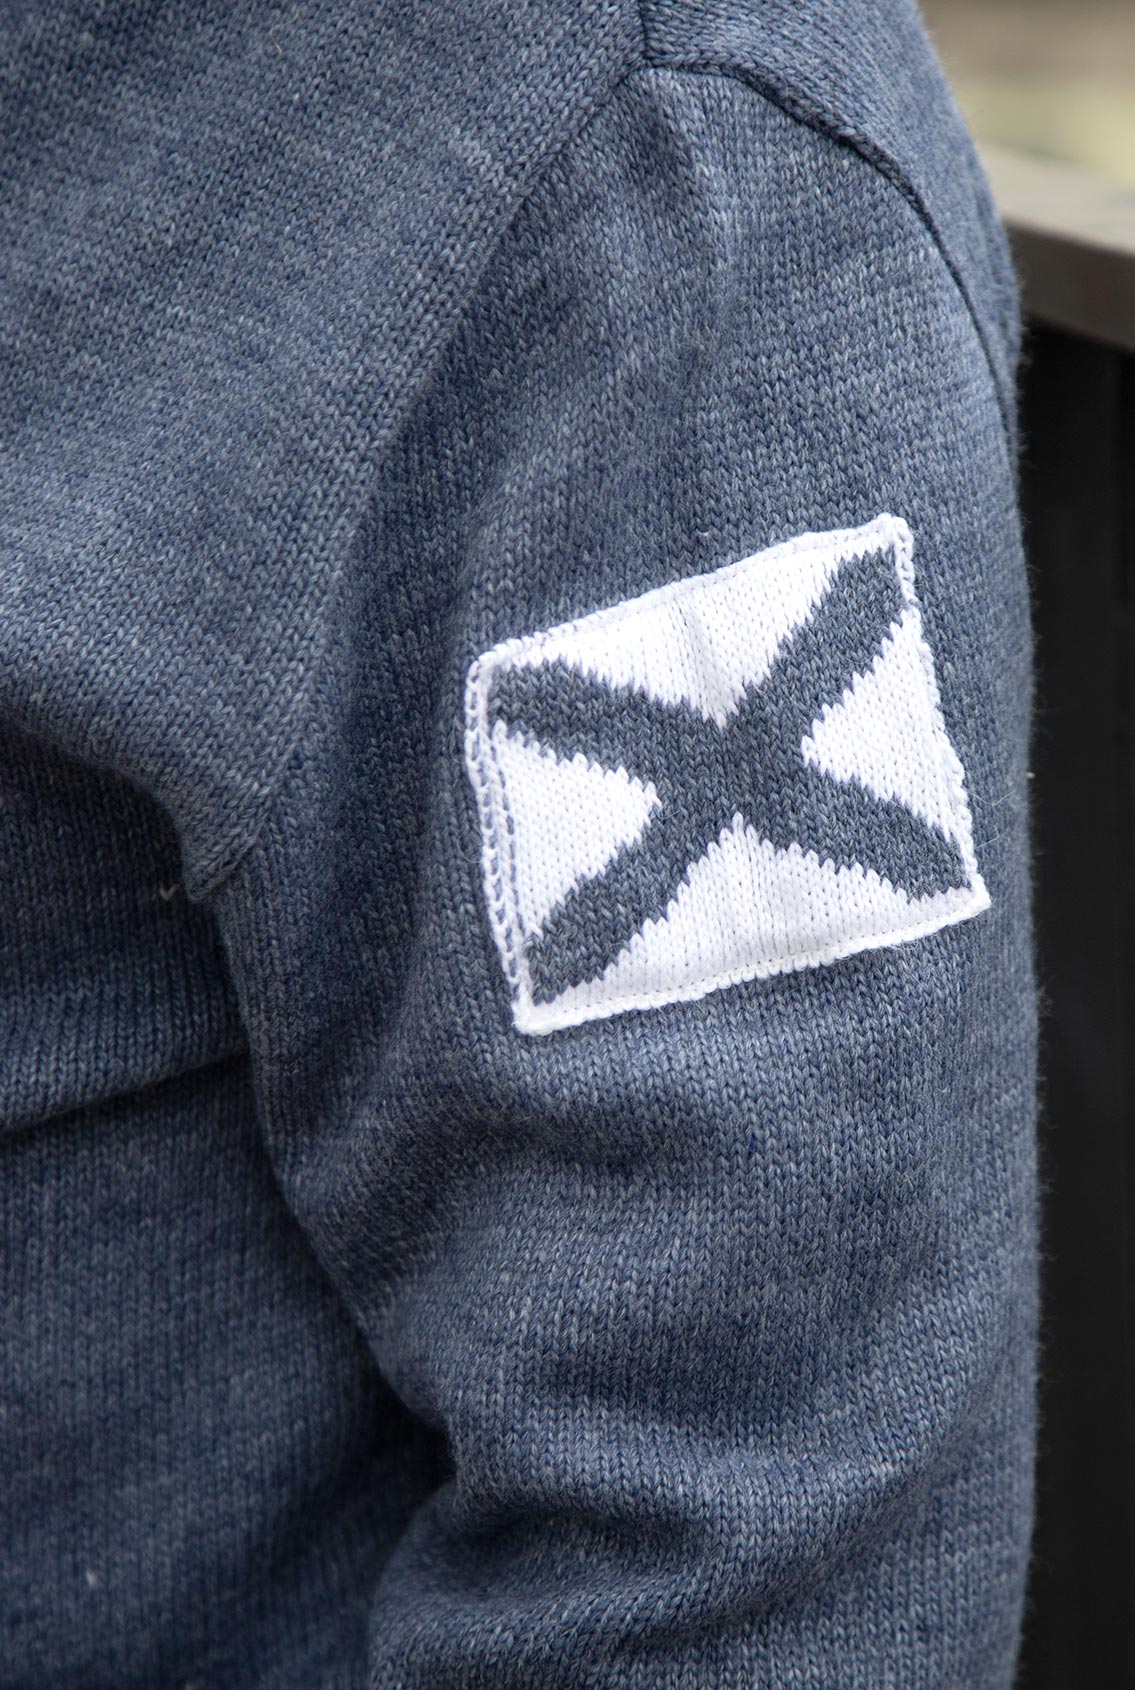 St. Andrew's cross on the sleeve 